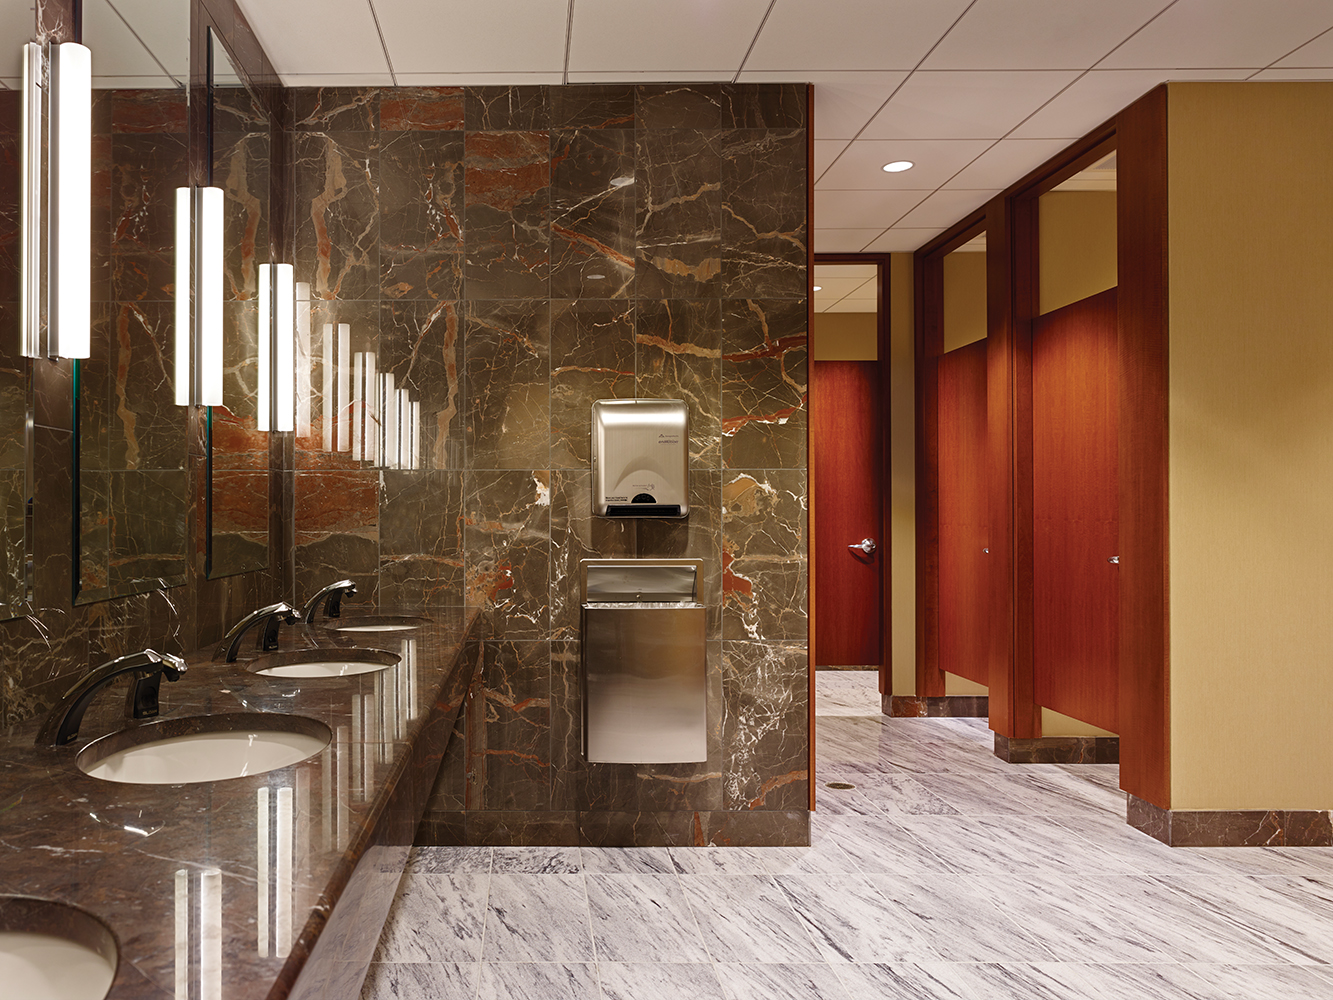 Voila modern vanity light fixtures illuminate mirrors in a public restroom with marble walls and countertops.